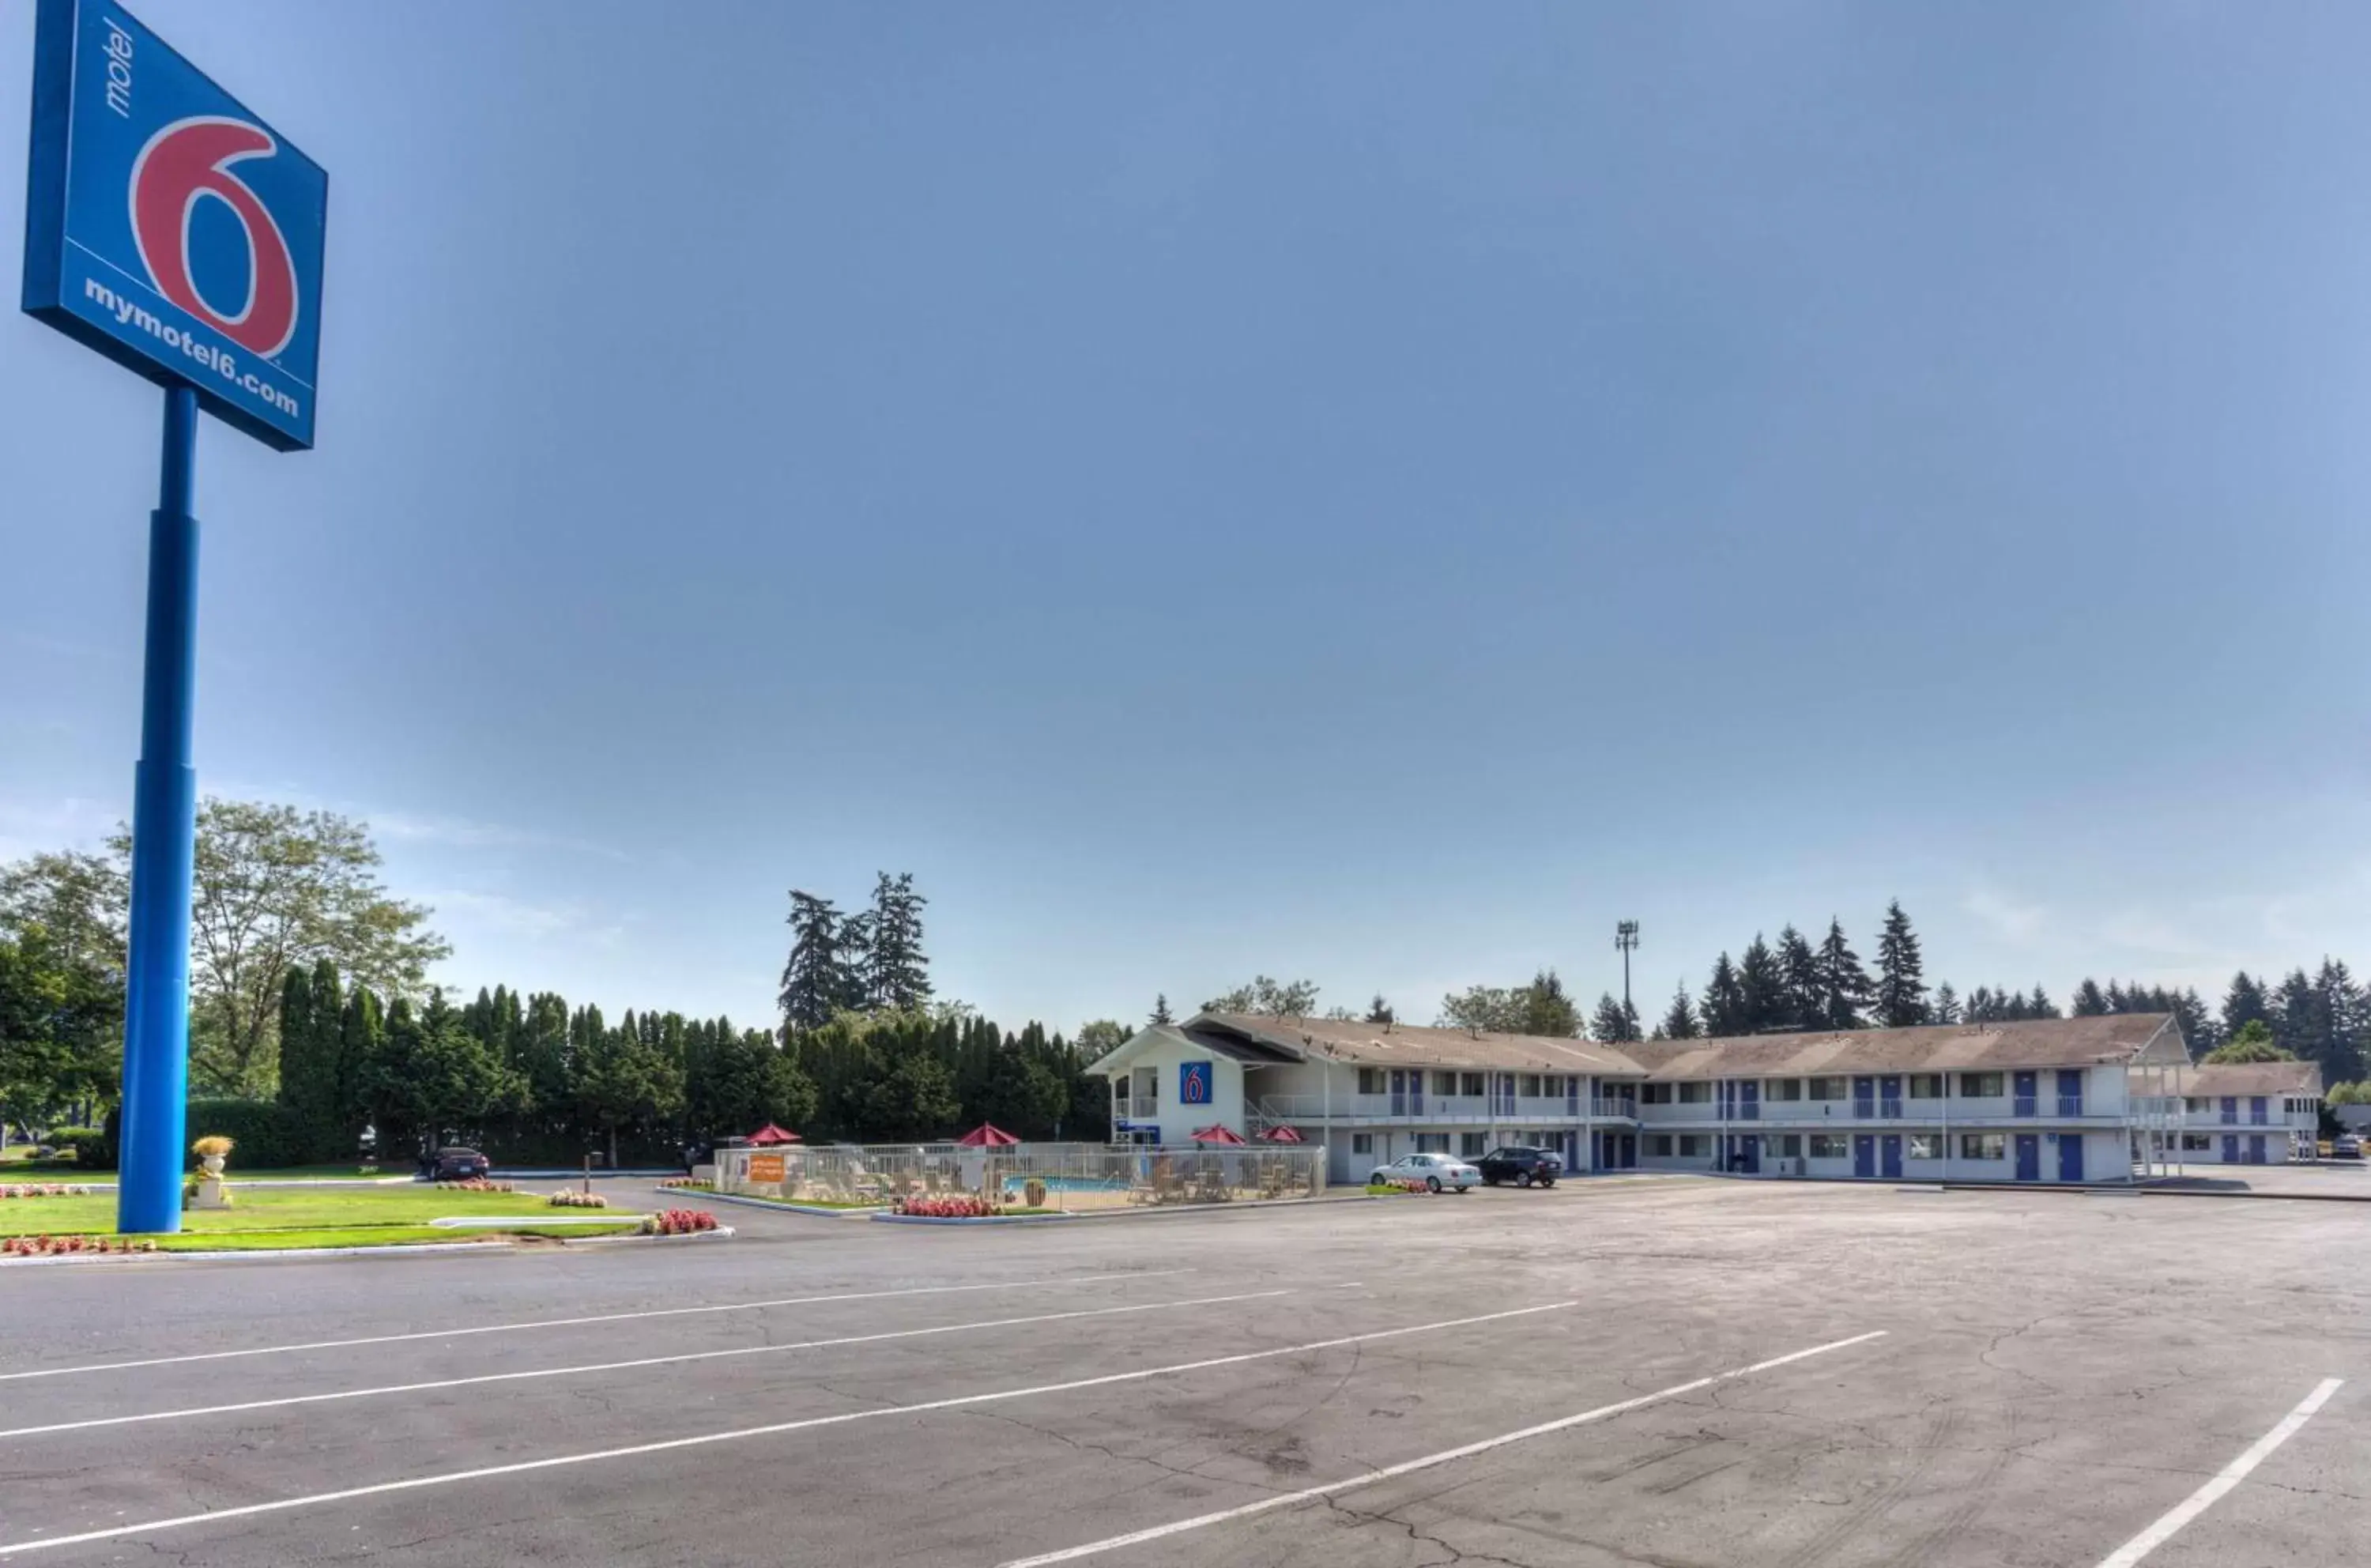 Property building in Motel 6-Tigard, OR - Portland South - Lake Oswego